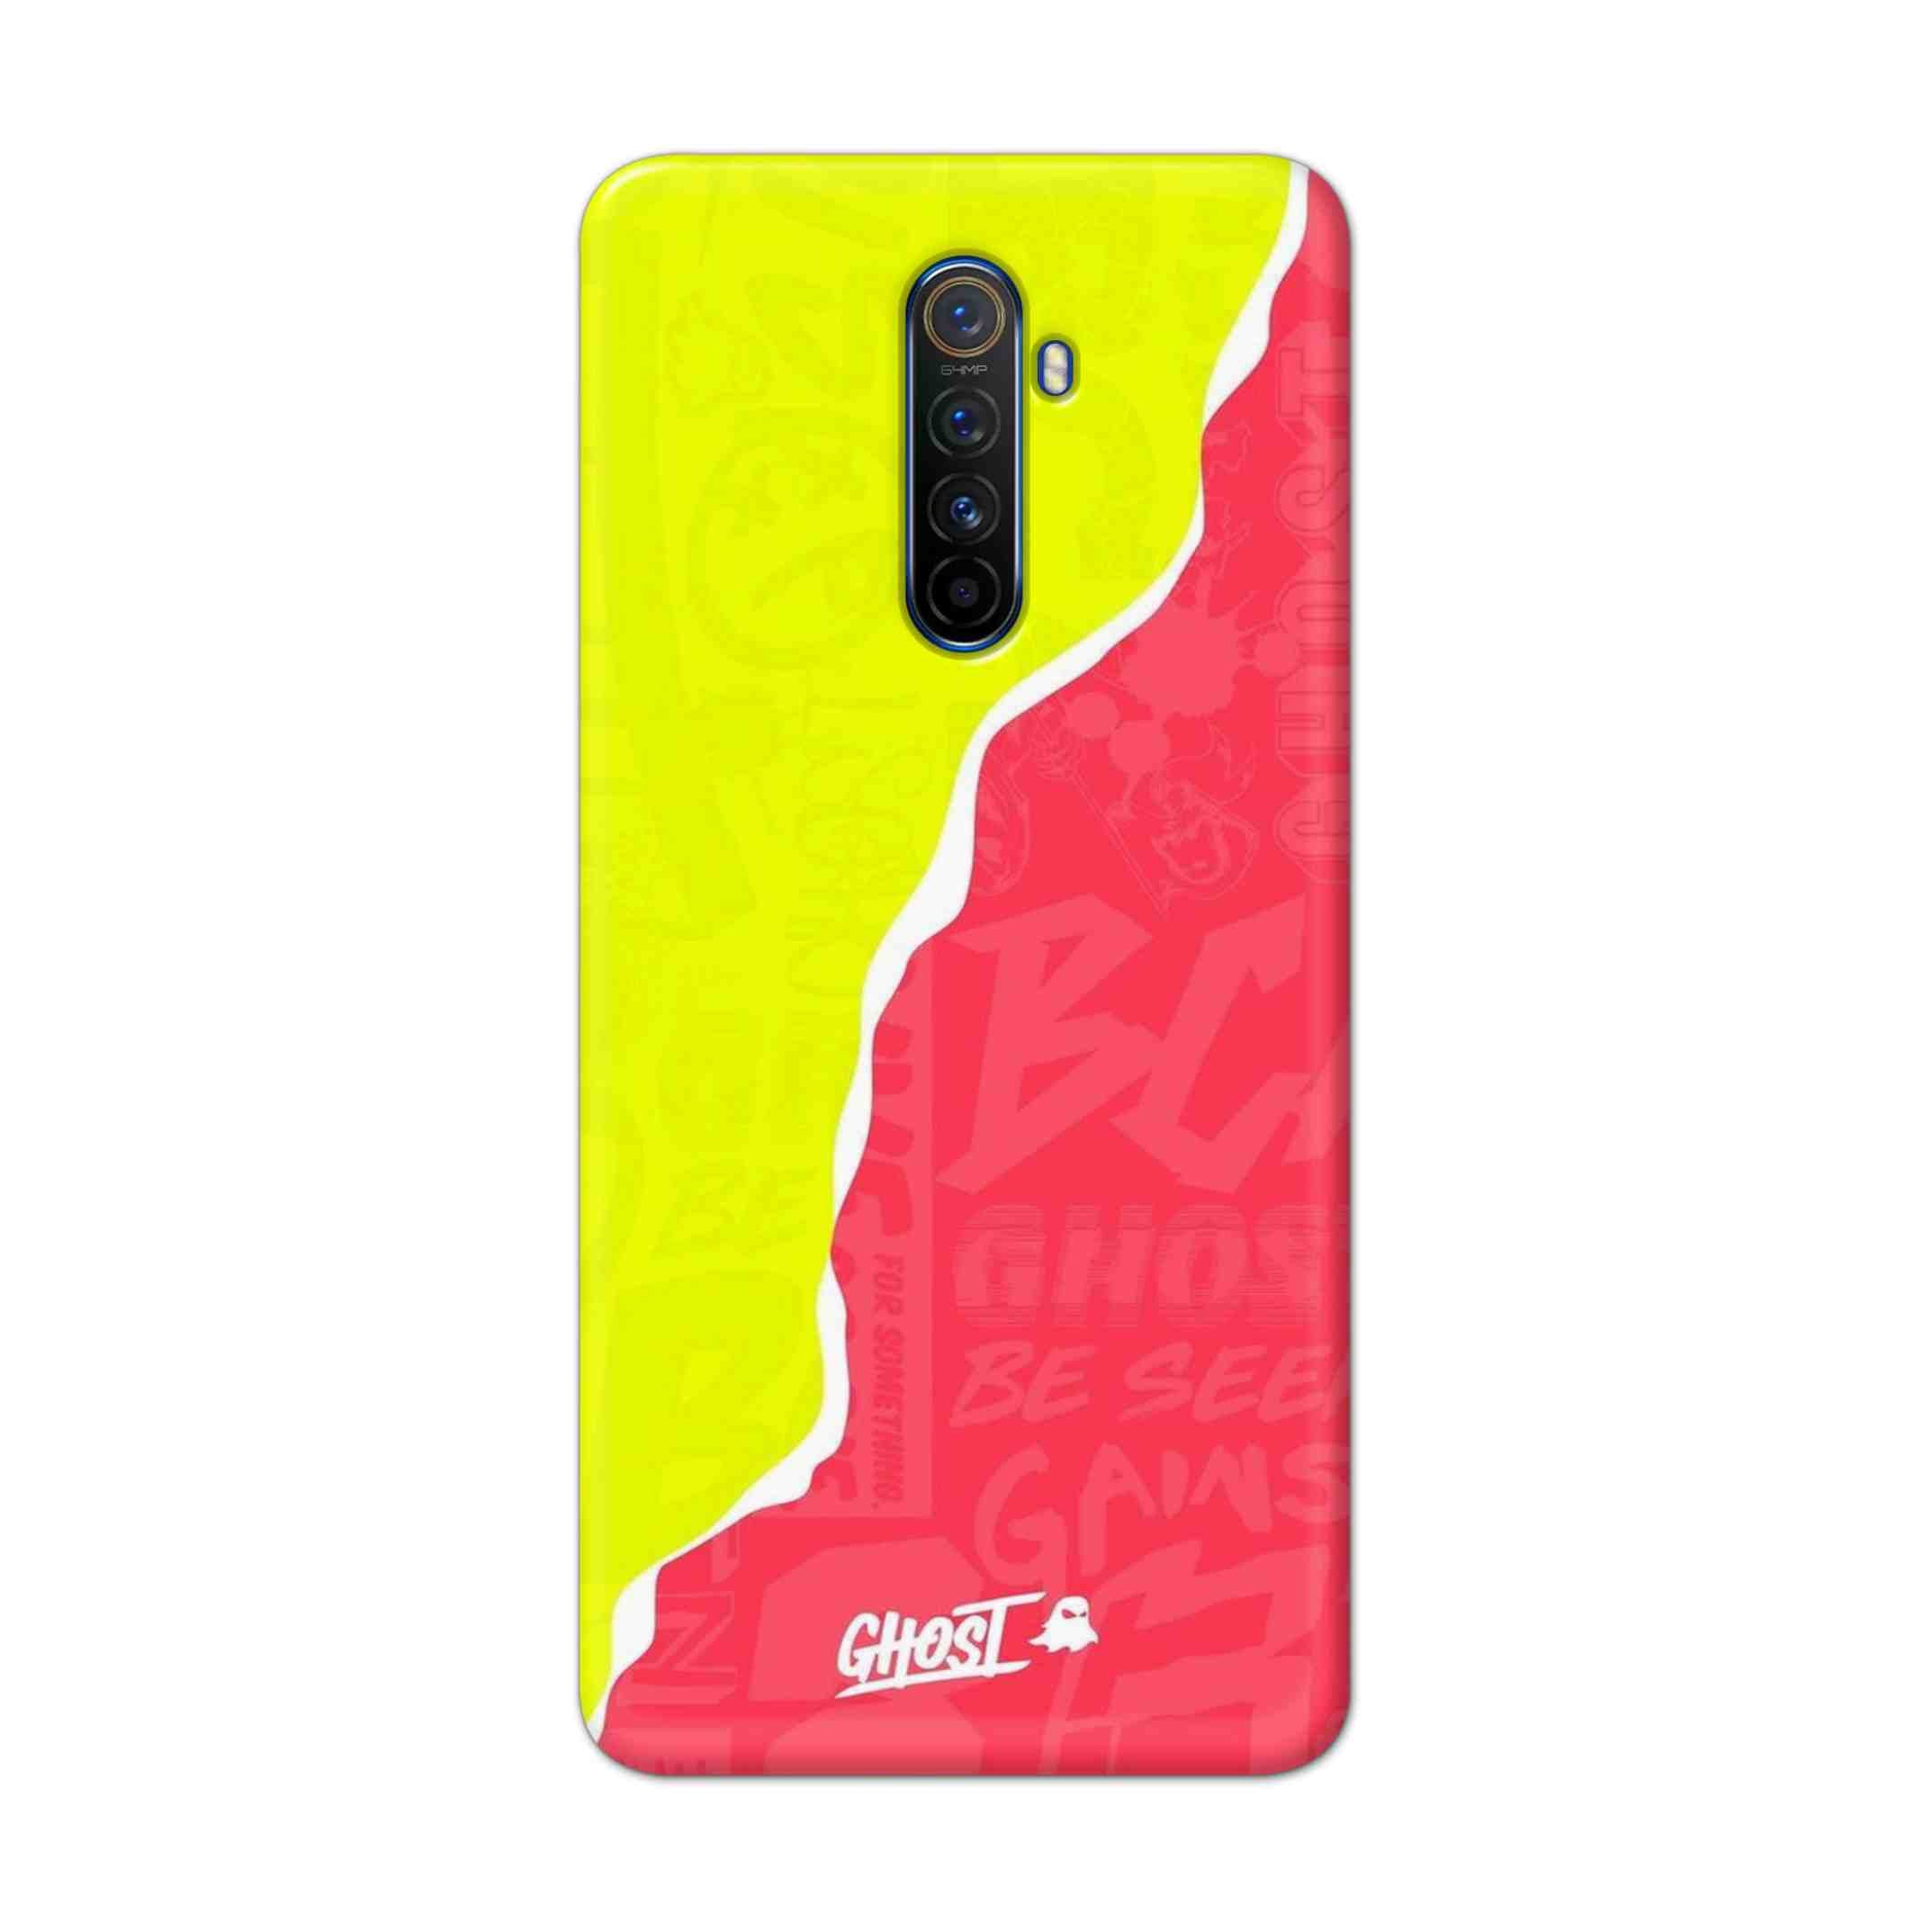 Buy Ghost Hard Back Mobile Phone Case Cover For Realme X2 Pro Online